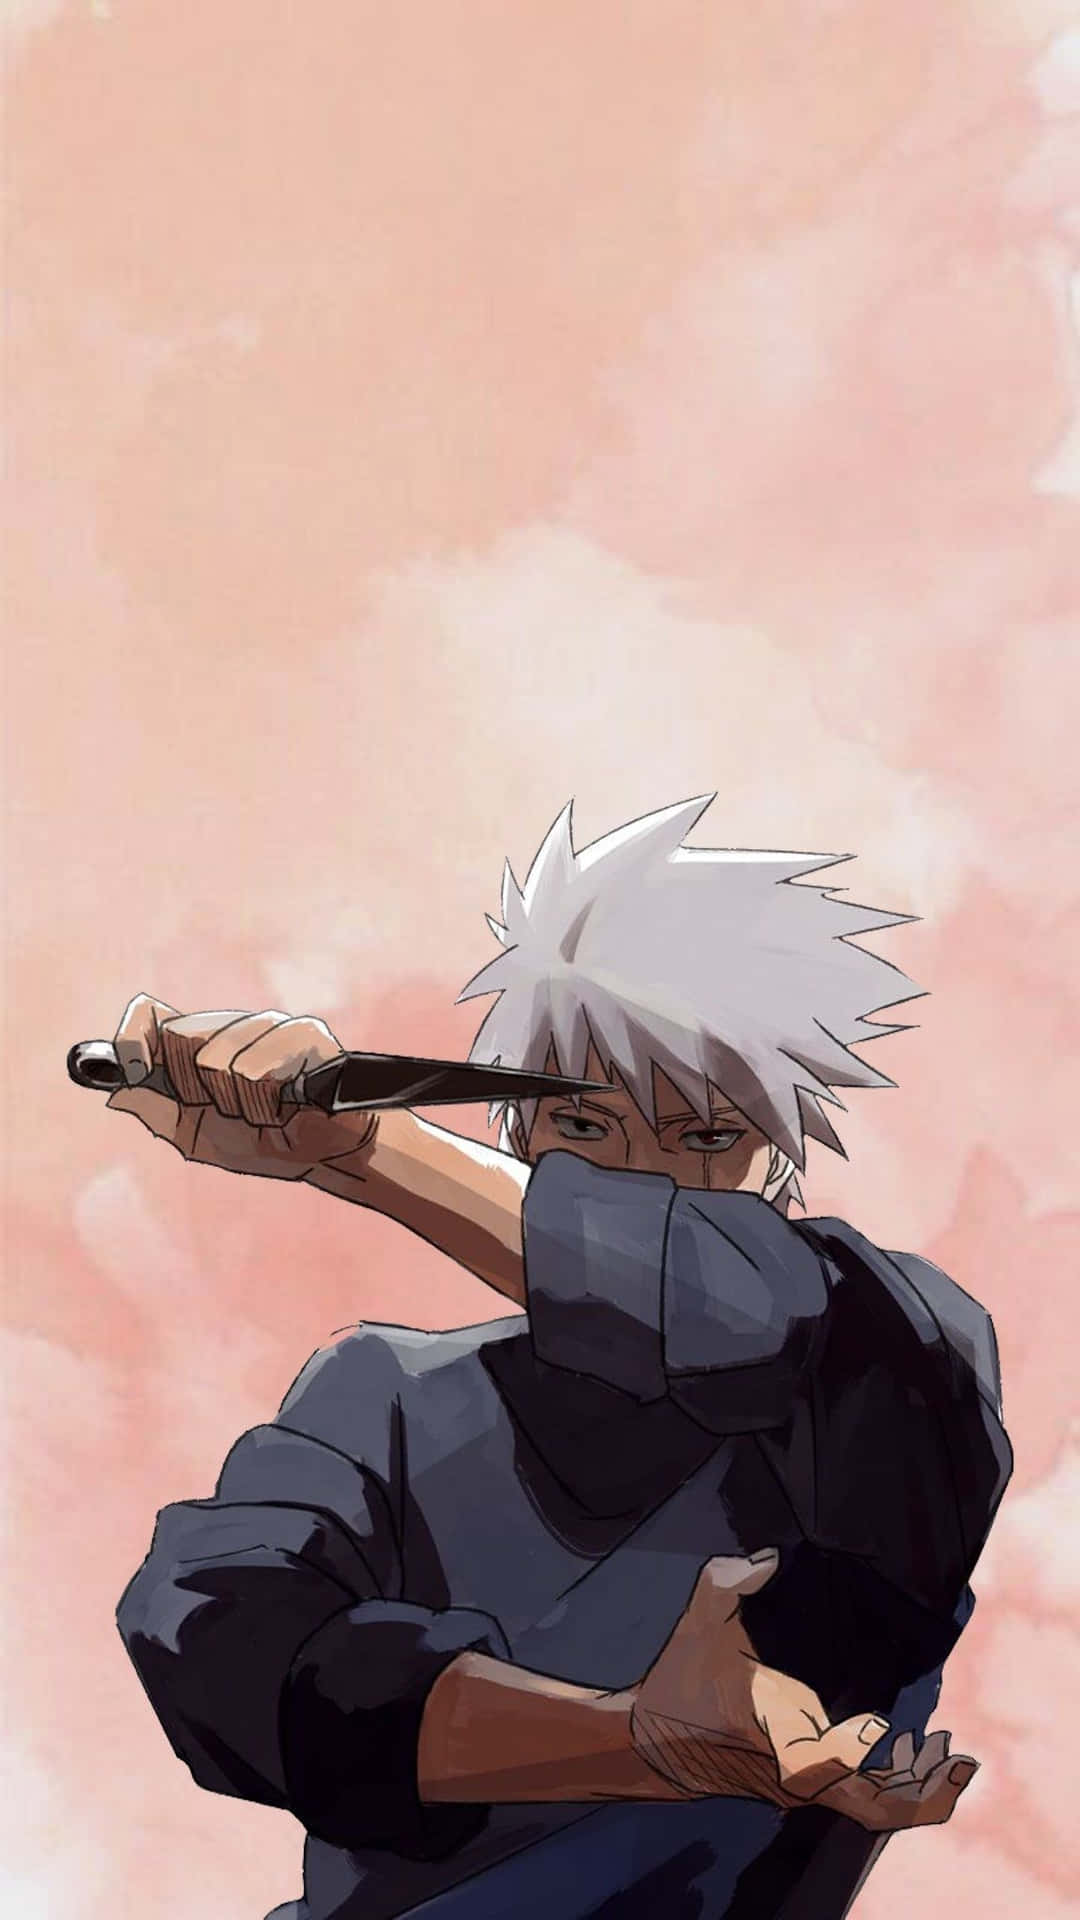 Young Kakashi Hatake in his classic outfit. Wallpaper